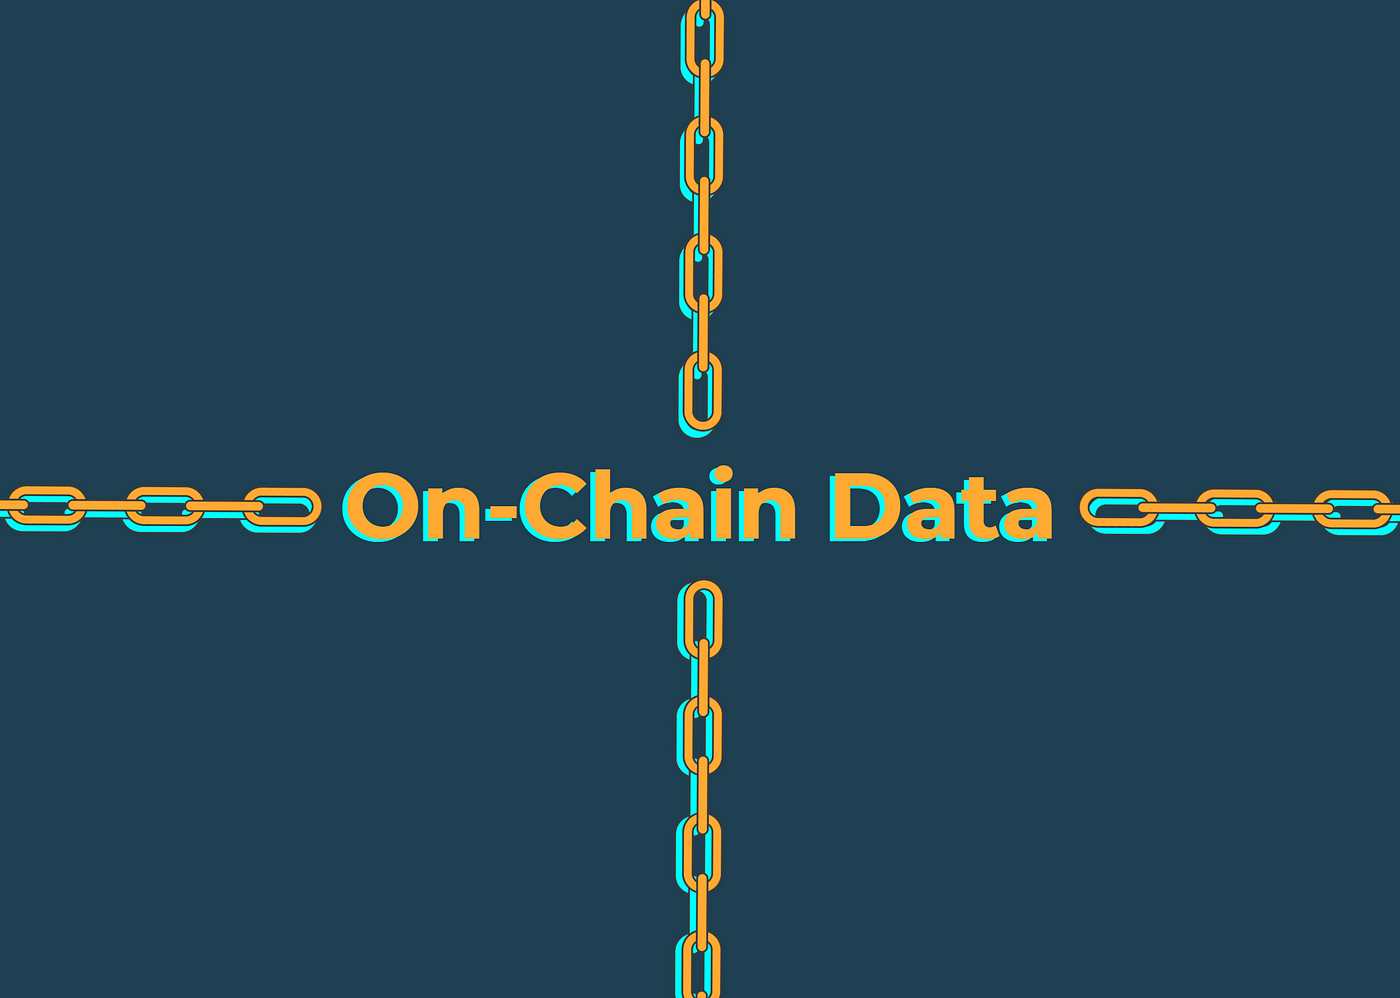 How on-chain data can make you a better trader